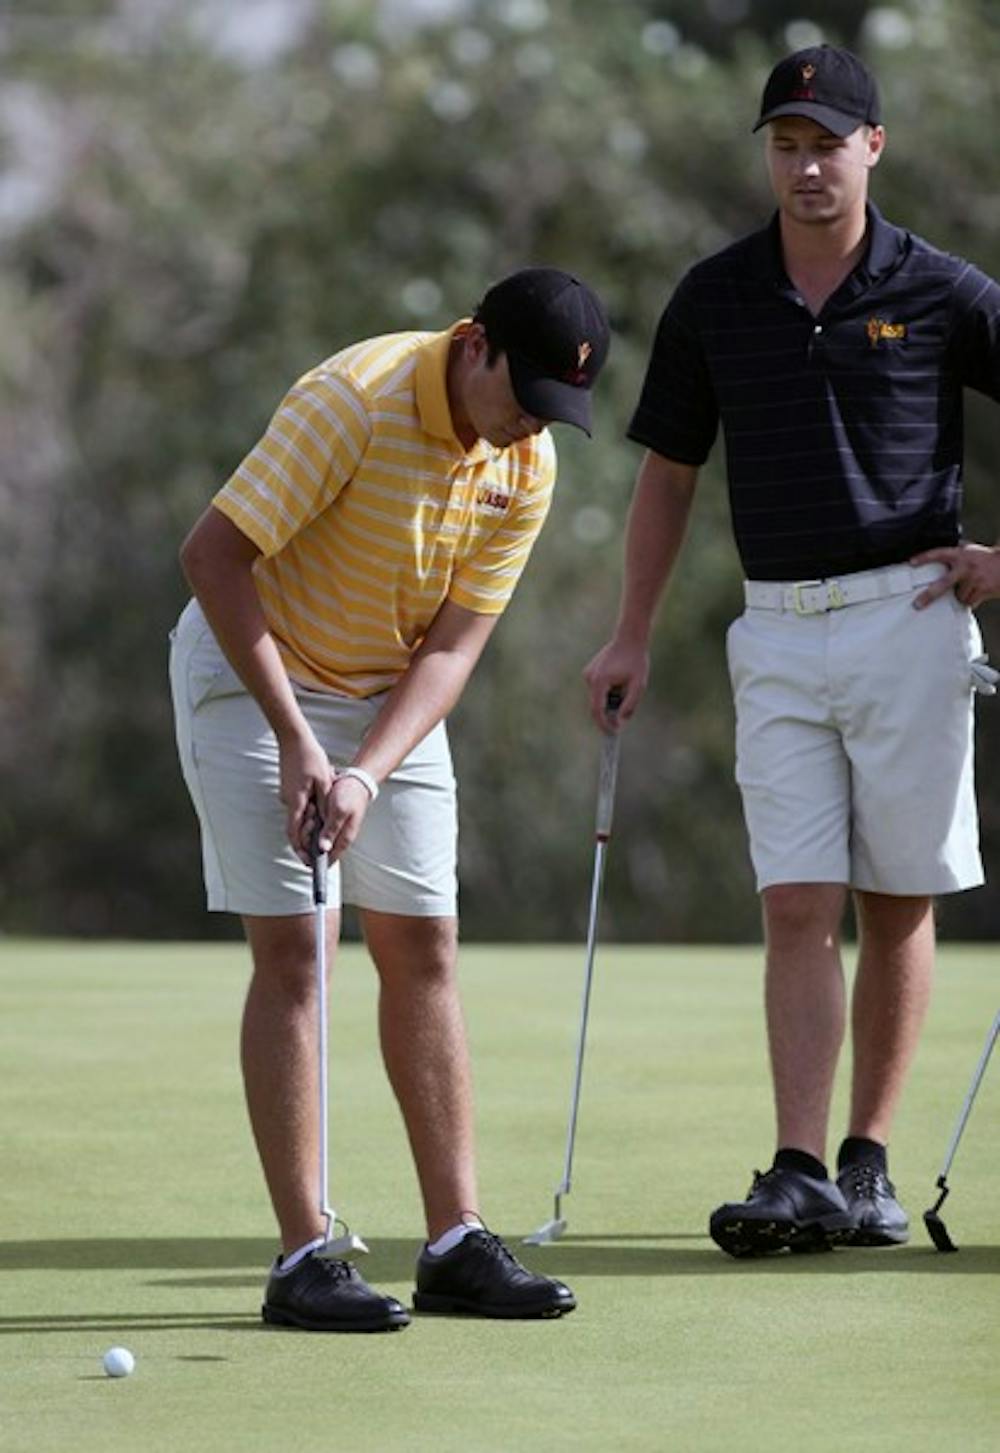 Freshman Cameron Palmer (left) practices putting with Mathias Schjoelberg (right) on Nov. 4, 2011. Palmer competed as an individual in the San Diego Intercollegiate Classic and was one of the few shining stars for the Sun Devils. (Photo by Beth Easterbrook)